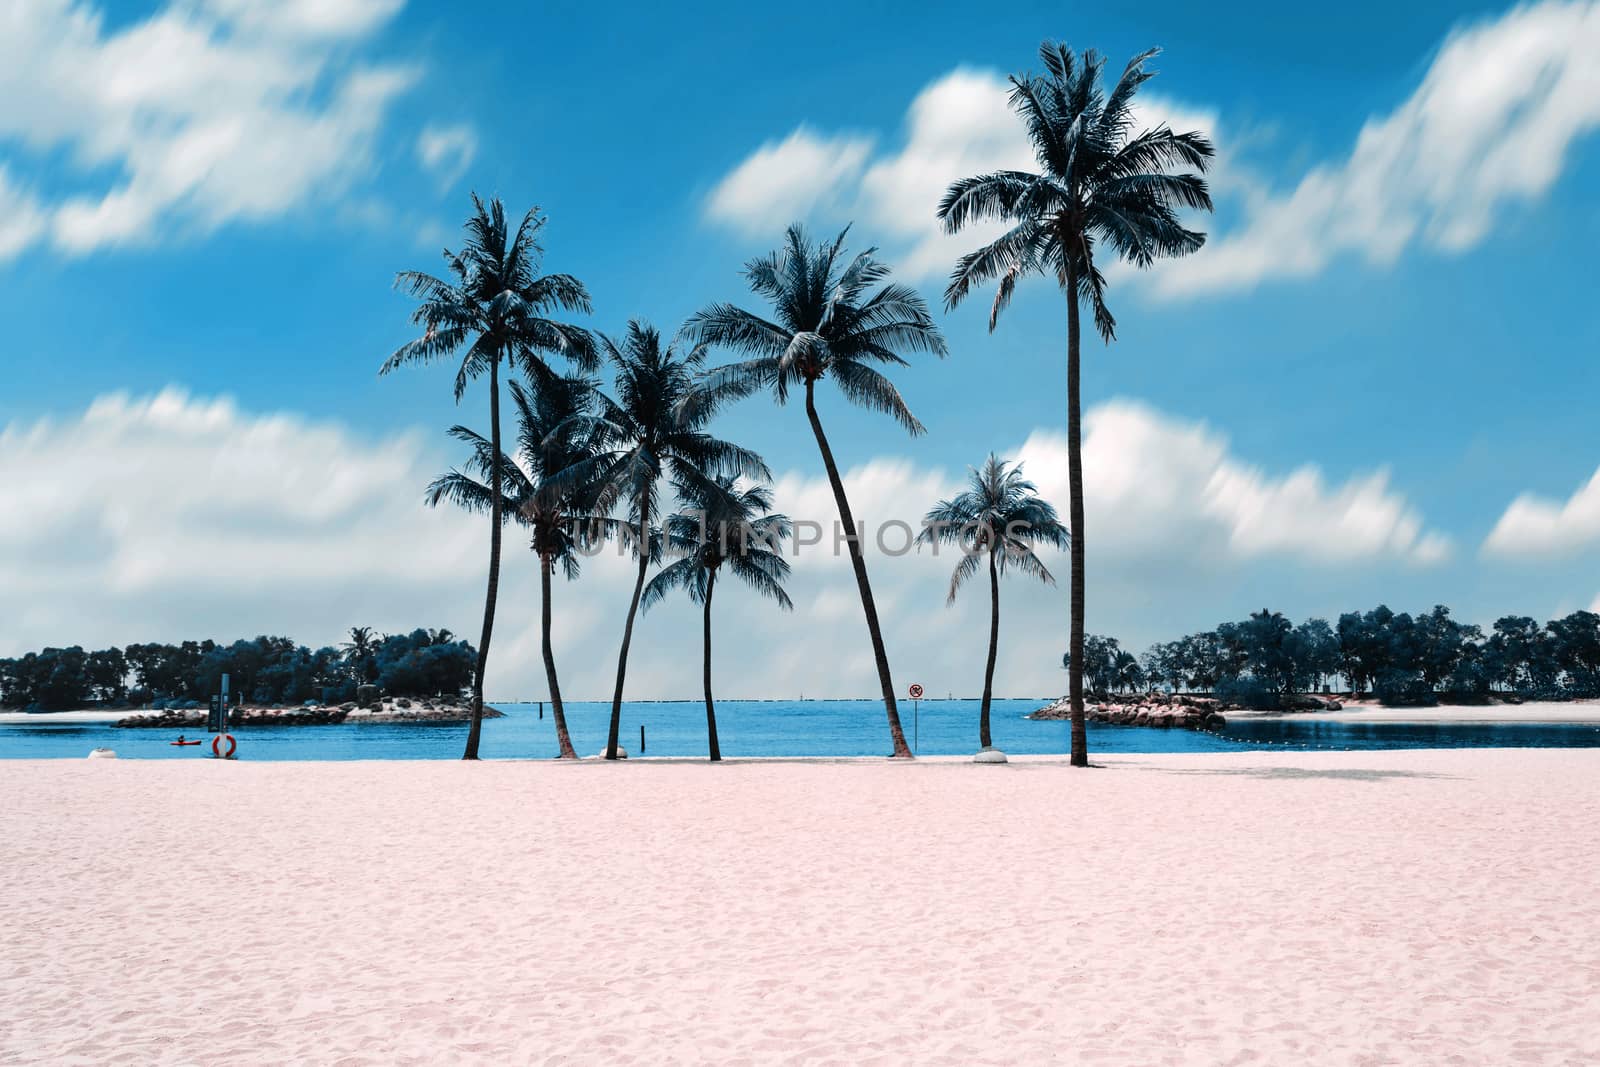 Group of coconut trees with the white sands on the beach with beautiful clouds sky background.